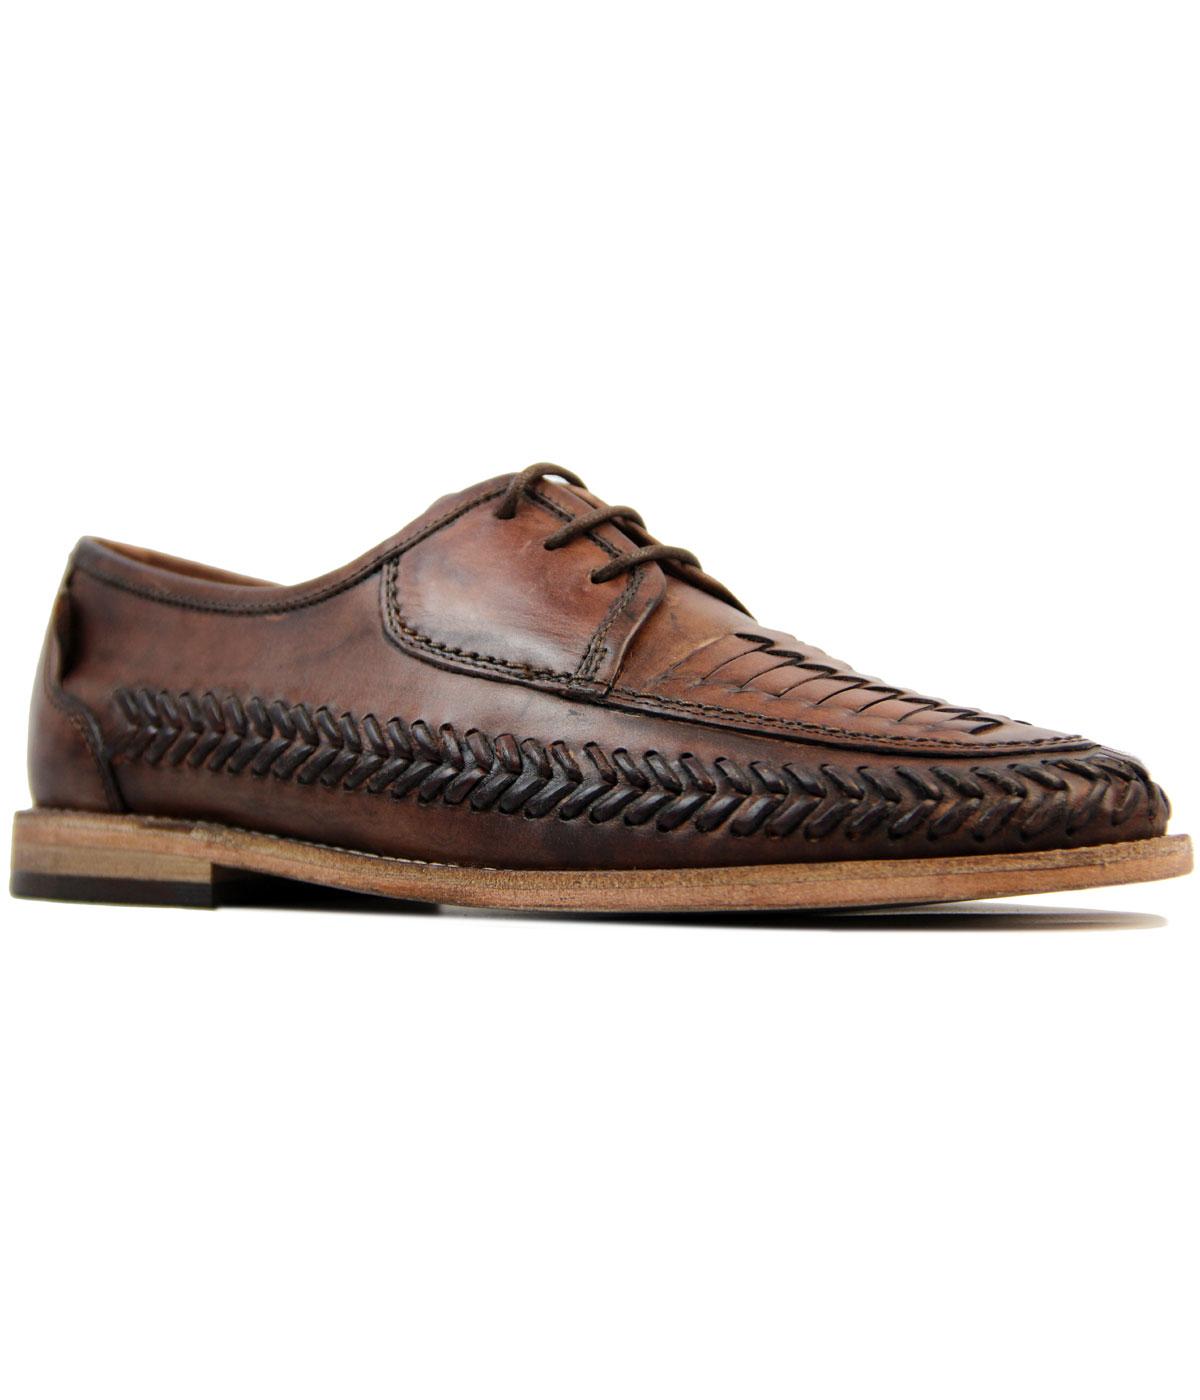 Anfa H by HUDSON Mod Woven Leather Summer Shoes